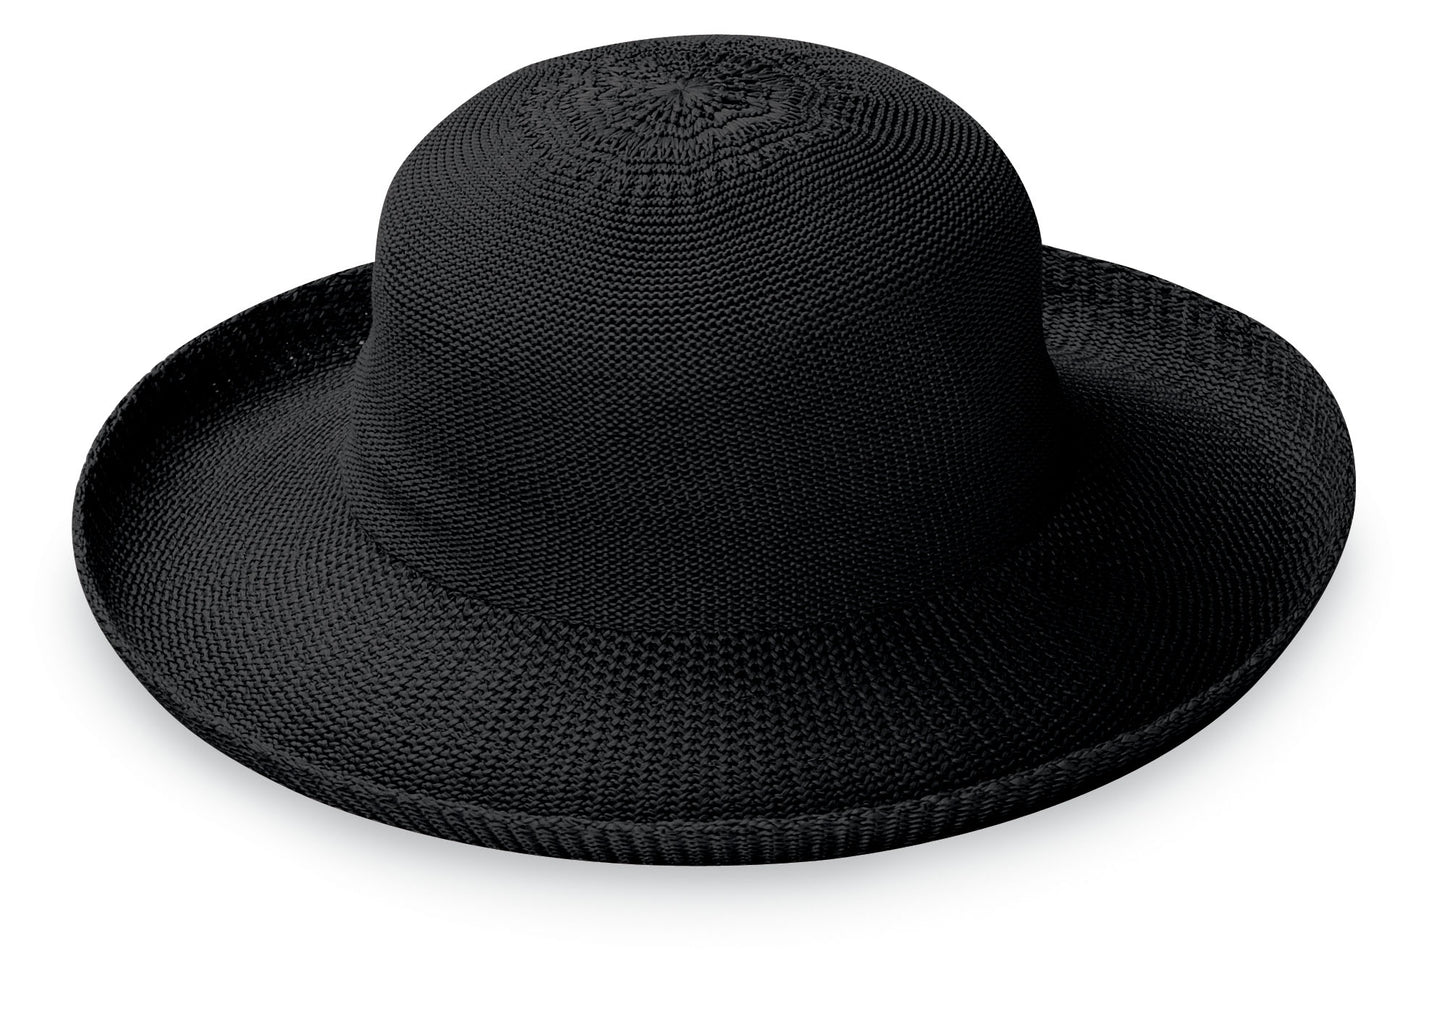 This packable black beach hat not only offers UPF 50+ sun protection but is also recommended by the Skin Cancer Foundation. Its wide brim ensures stylish sun coverage, making it a travel-friendly and fashionable addition to your personal fashion collection.